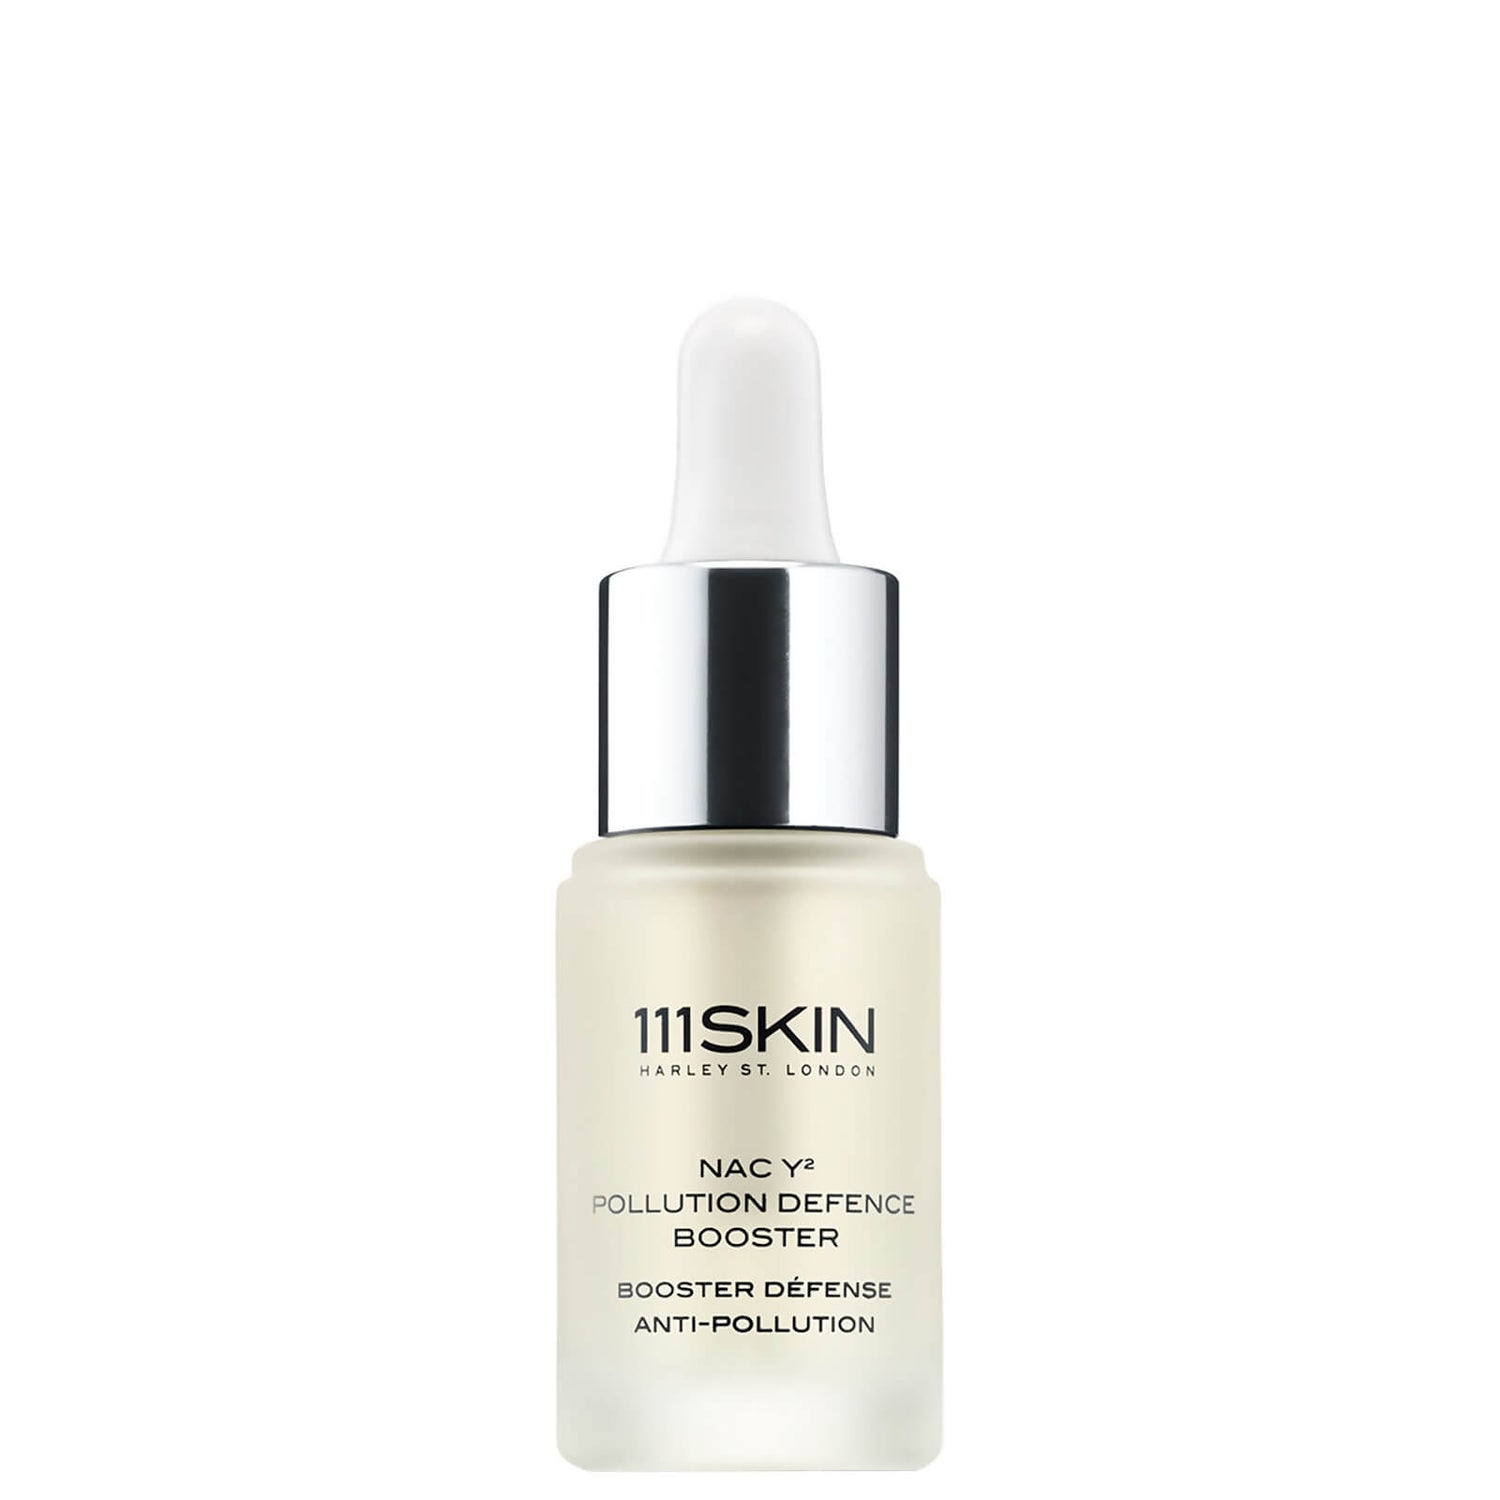 111SKIN NACY2 Pollution Defence Booster 20ml